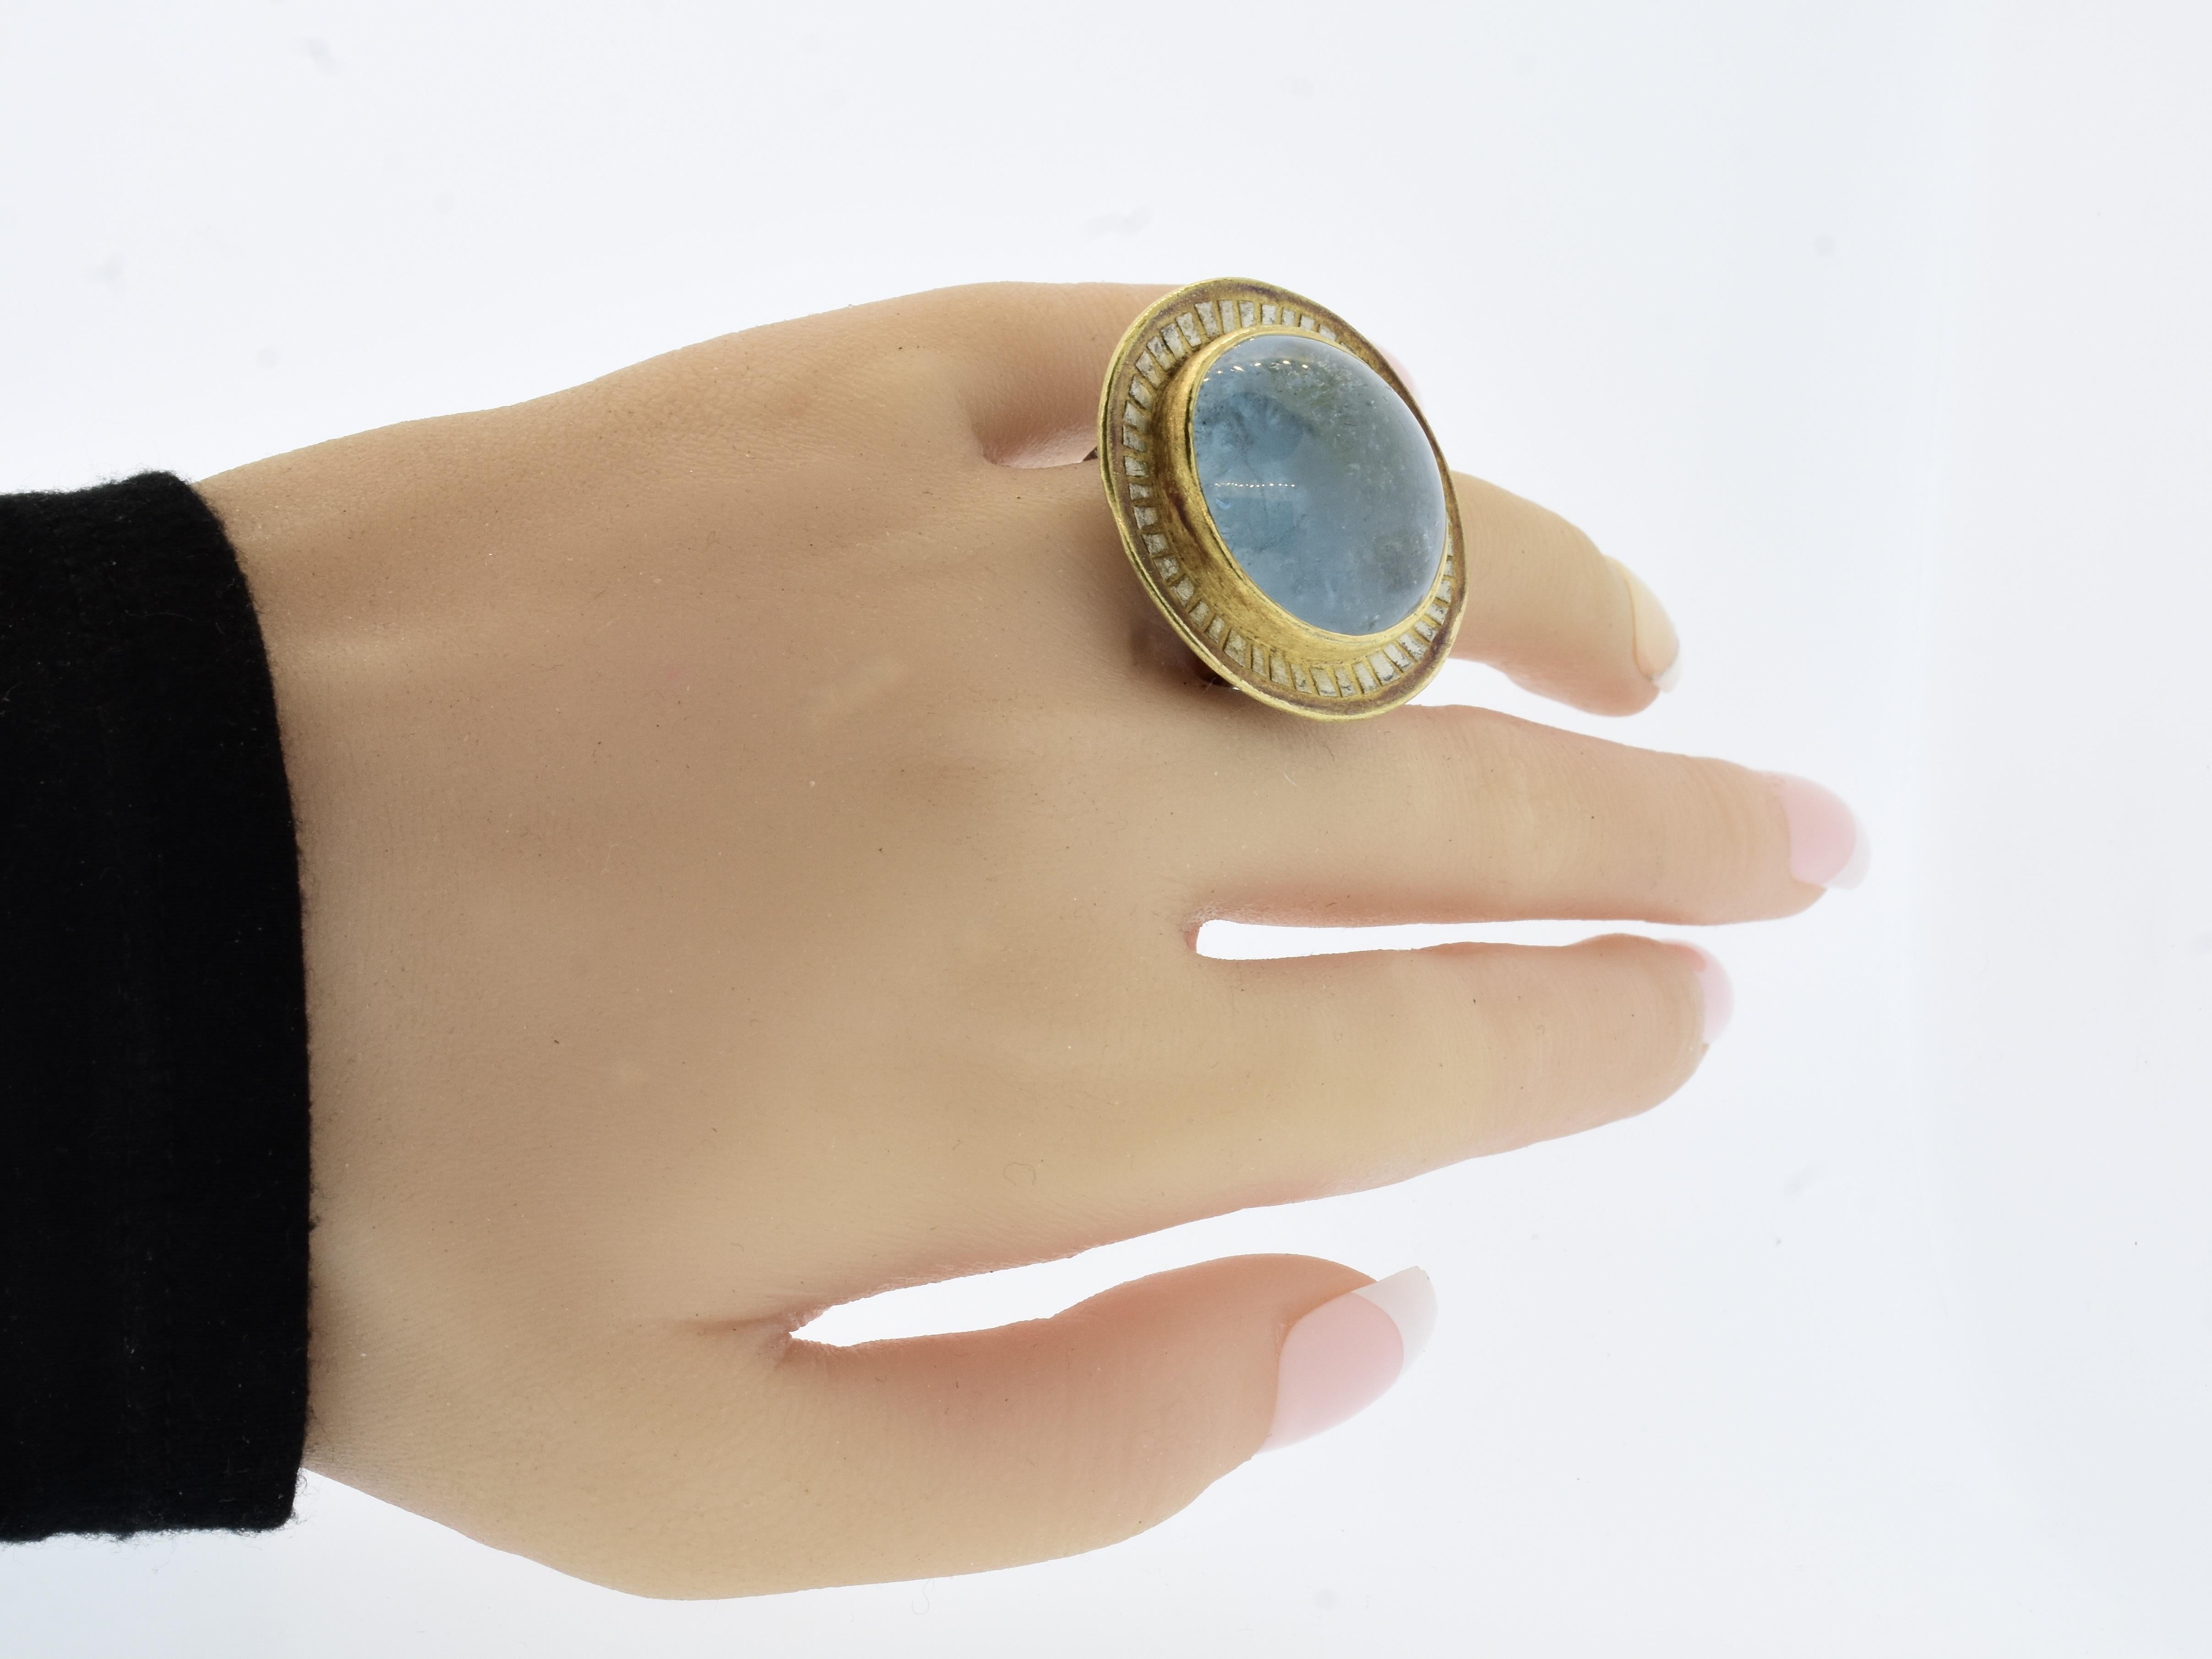 Contemporary jewelry artist Michael Zobel has hand crafted a highly unusual ring centering an approximately 47 ct. natural cabochon cut aquamarine bezel set in 22K yellow gold accented with stylized 'rays' of oxidized sterling silver on the gold top